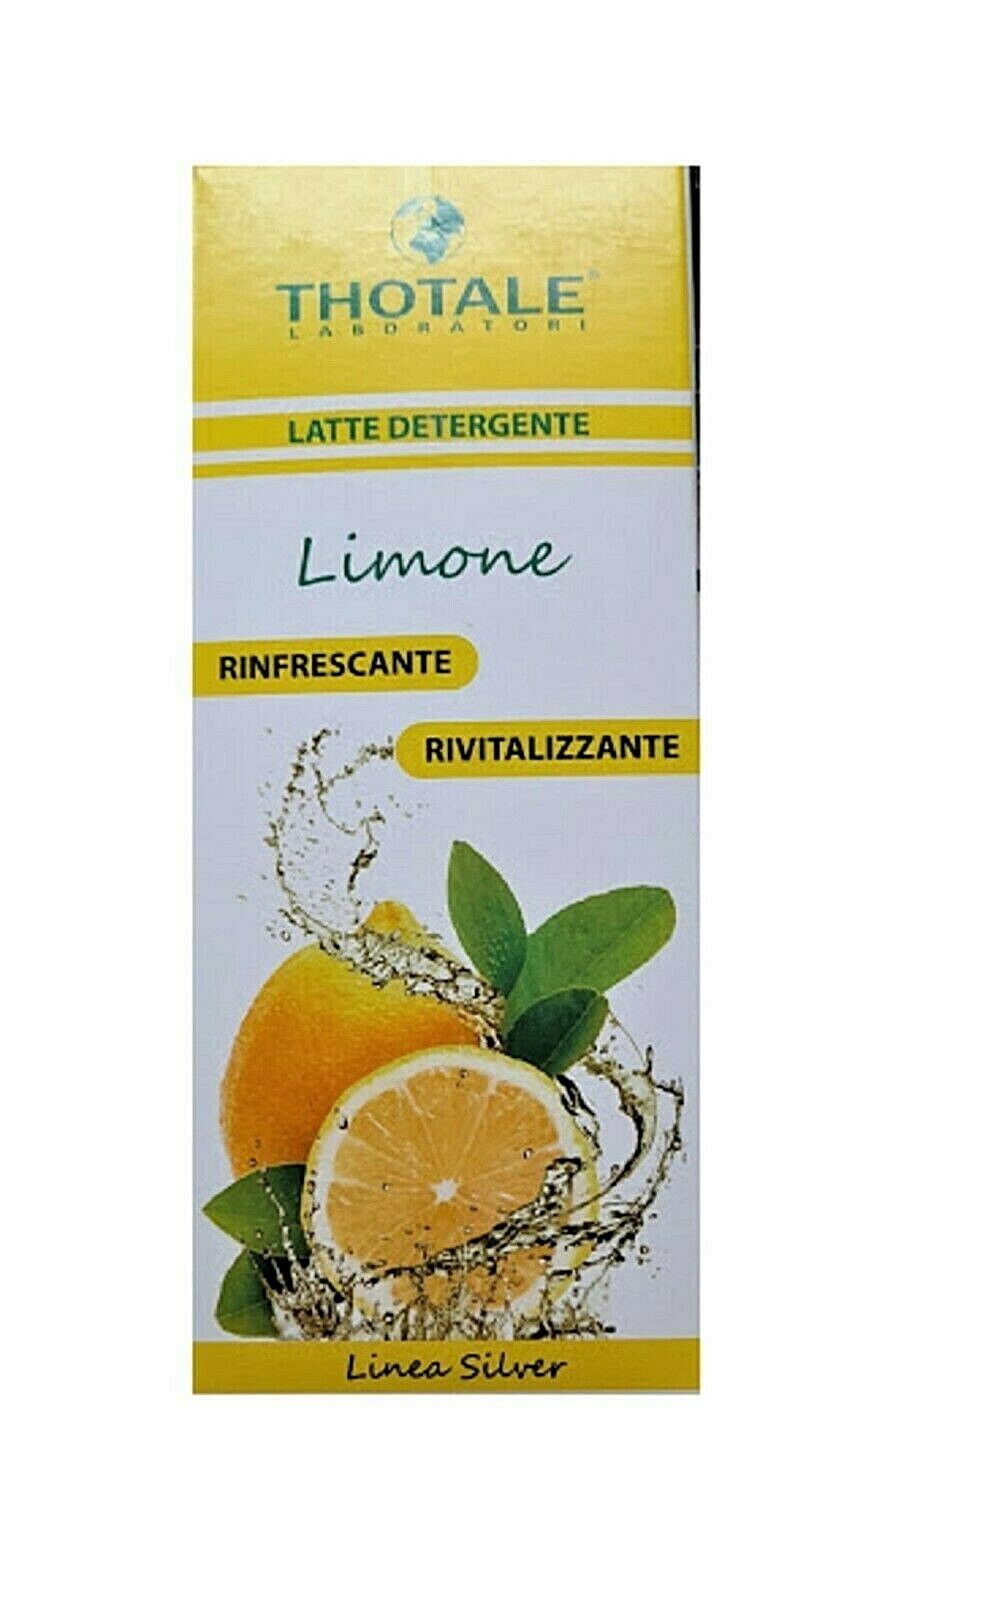 Image of Latte Detergente Limone Thotale(R) 200ml